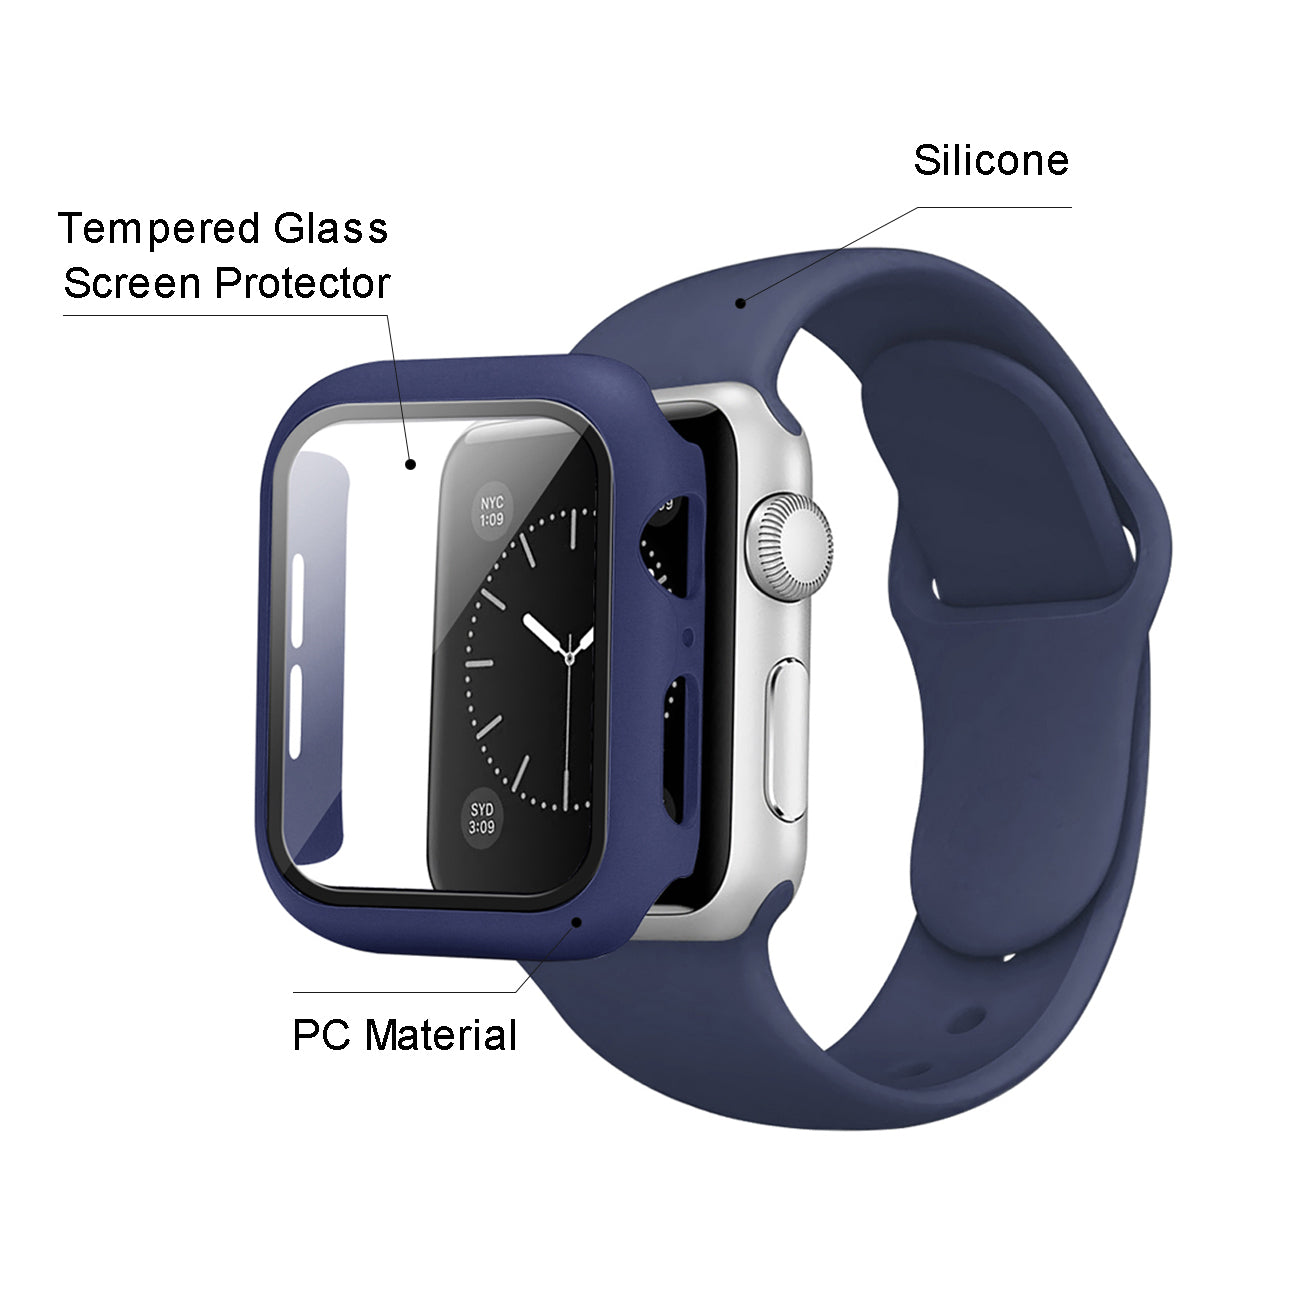 Watch Case PC With Glass Screen Protector, Silicone Watch Band Apple Watch 42mm Navy Color